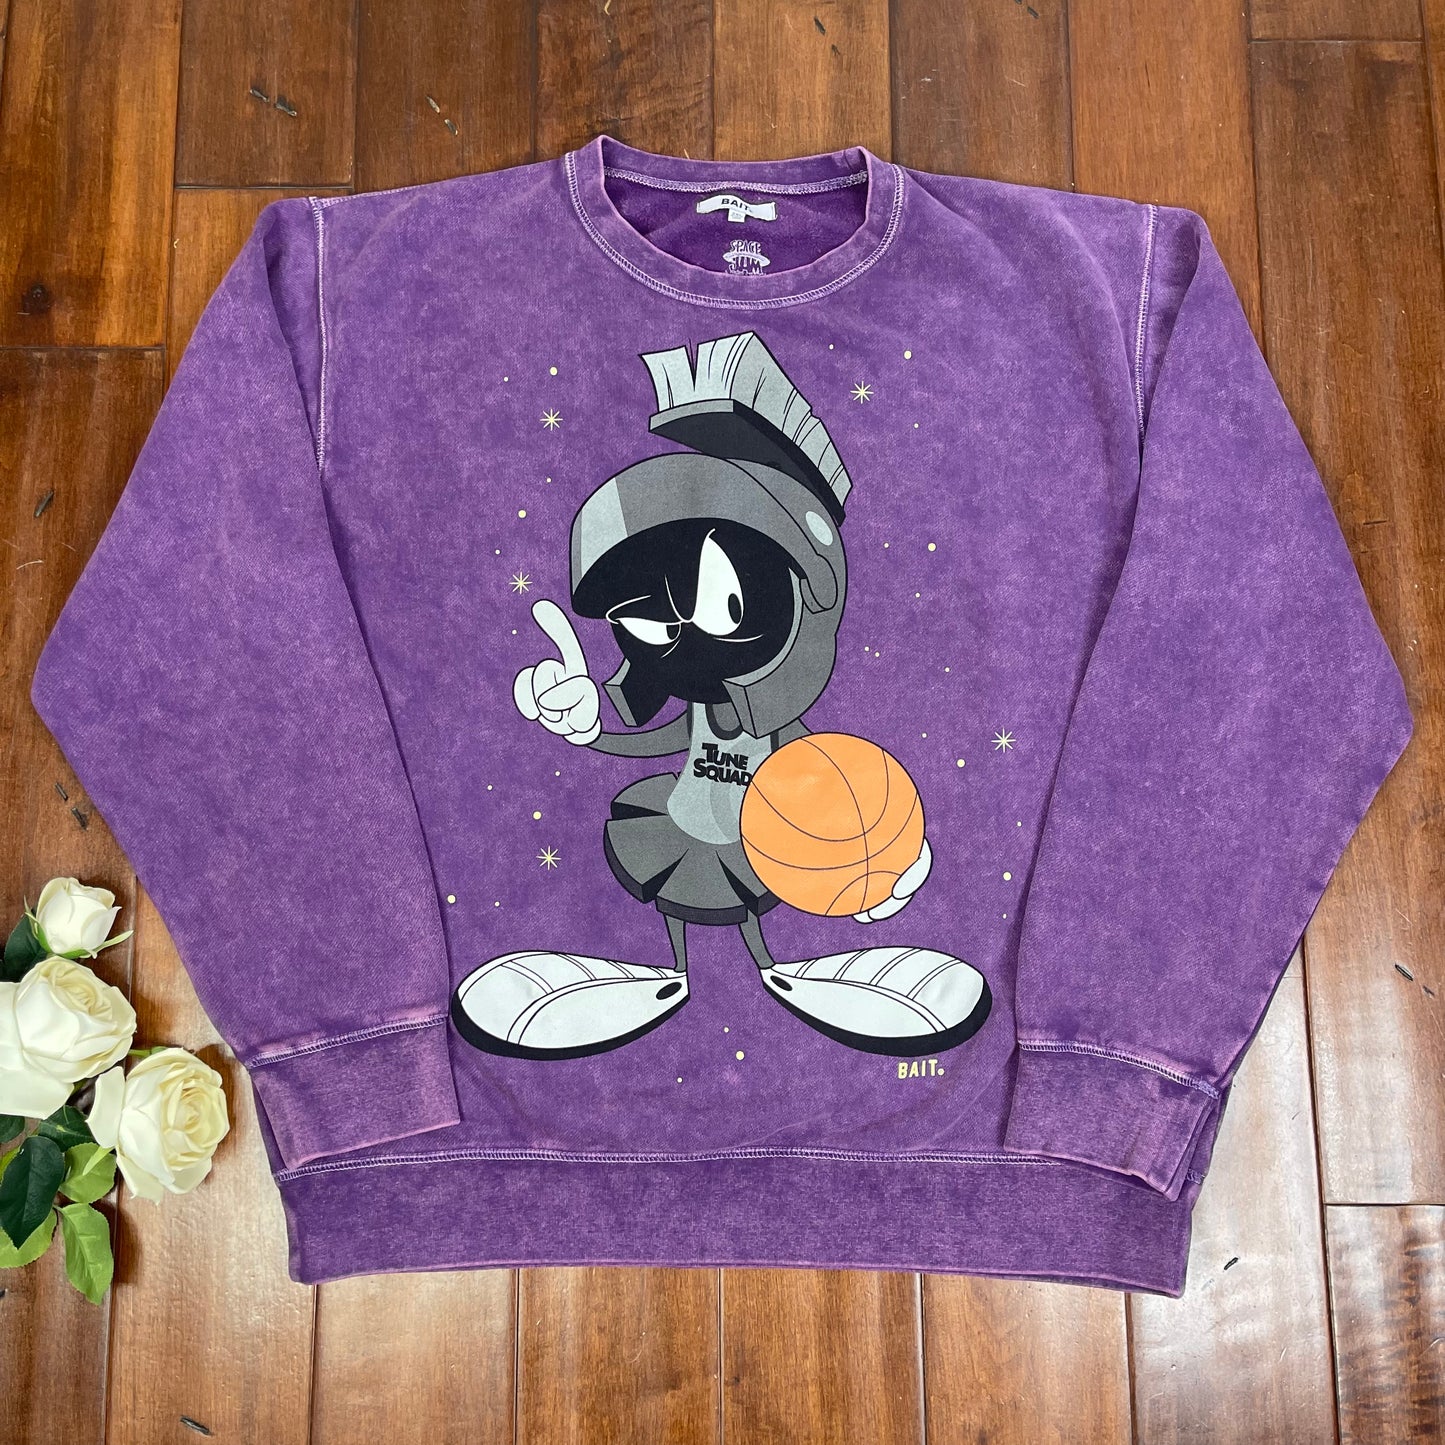 THRIFTED SPACE JAM MARVIN THE MARTIAN CREWNECK